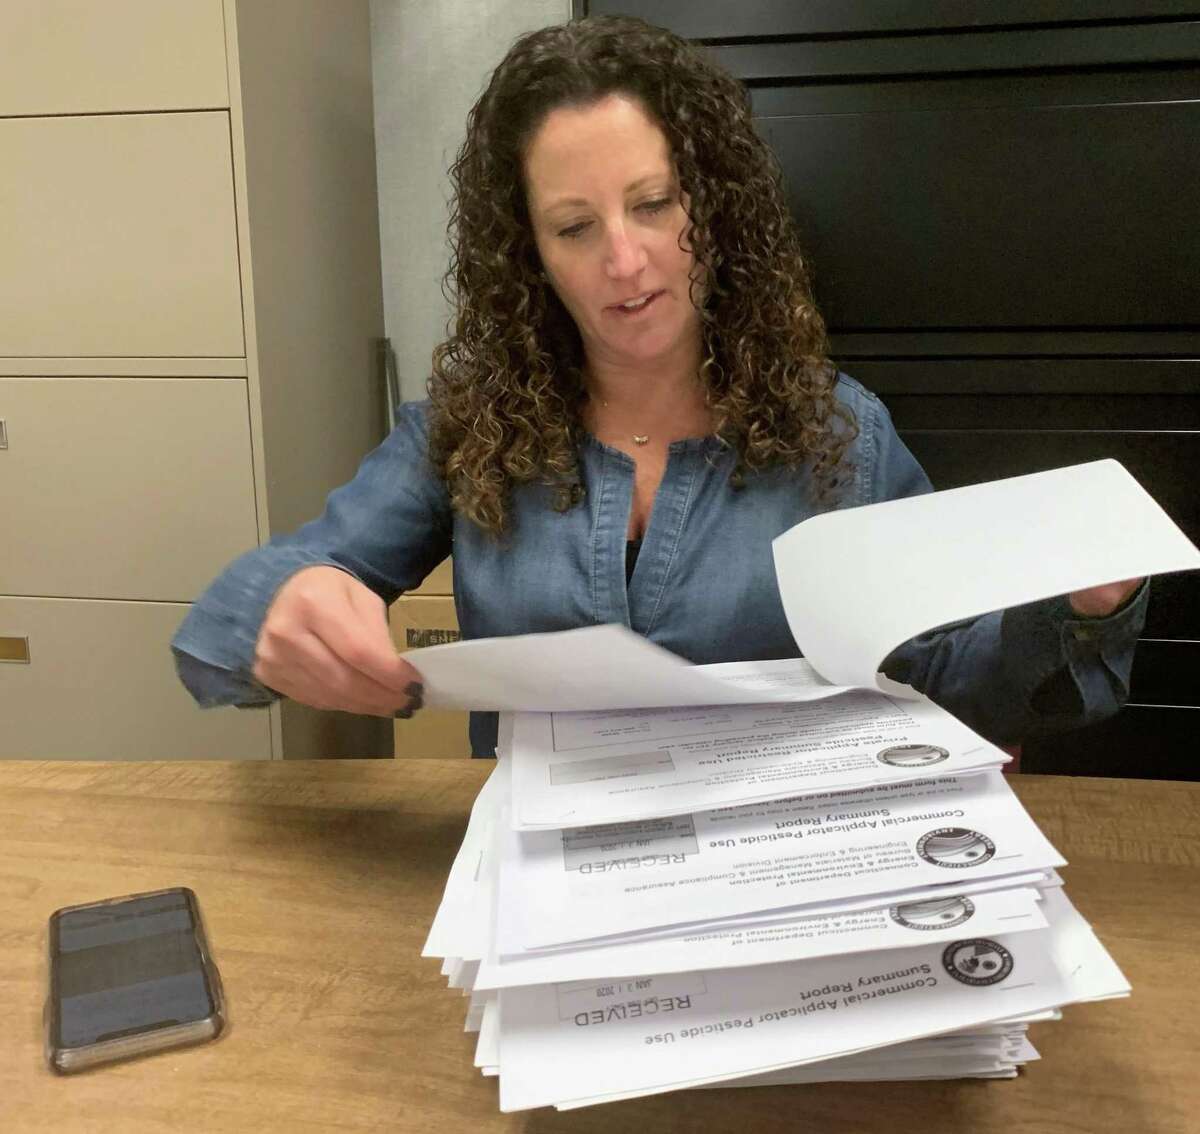 Tara Cook-Littman, of Fairfield, has researched the golf course and agricultural applications in Connecticut of the controversial pesticide chloropyifos, which is banned in Europe and banned in the United States for most household use. She is shown with files at the offices of DEEP, the state Department of Energy and Environmental Protection.